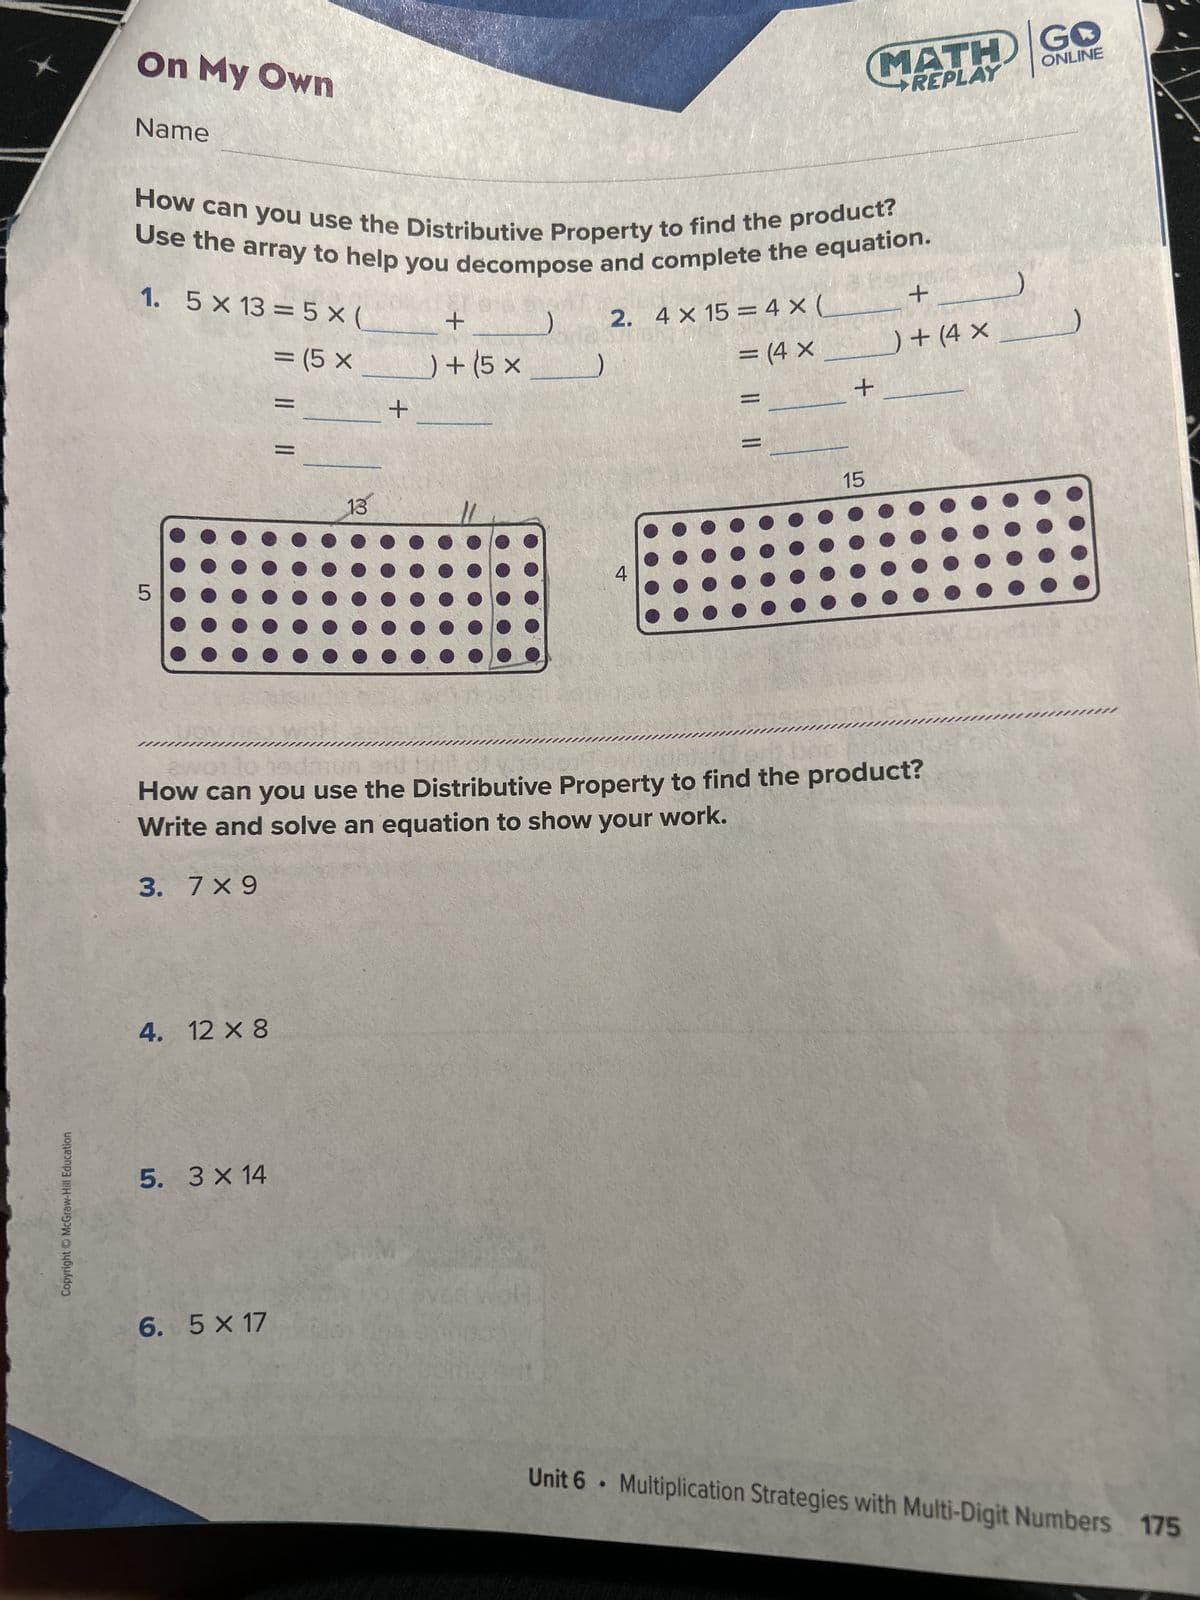 Copyright © McGraw-Hill Education
On My Own
Name
How can you use the Distributive Property to find the product?
Use the array to help you decompose and complete the equation.
1. 5 x 13 = 5 x (
= (5 x
LO
5
3. 7×9
4. 12 x 8
5. 3 × 14
|| ||
6. 5 X 17
woh
13
+
) + (5 x
+
2. 4 x 15 = 4 x (
= (4 X
4
| || ||
GO
MATH ONLINE
REPLAY
mum
How can you use the Distributive Property to find the product?
Write and solve an equation to show your work.
15
+
_) + (4 x
+
Unit 6 Multiplication Strategies with Multi-Digit Numbers 175